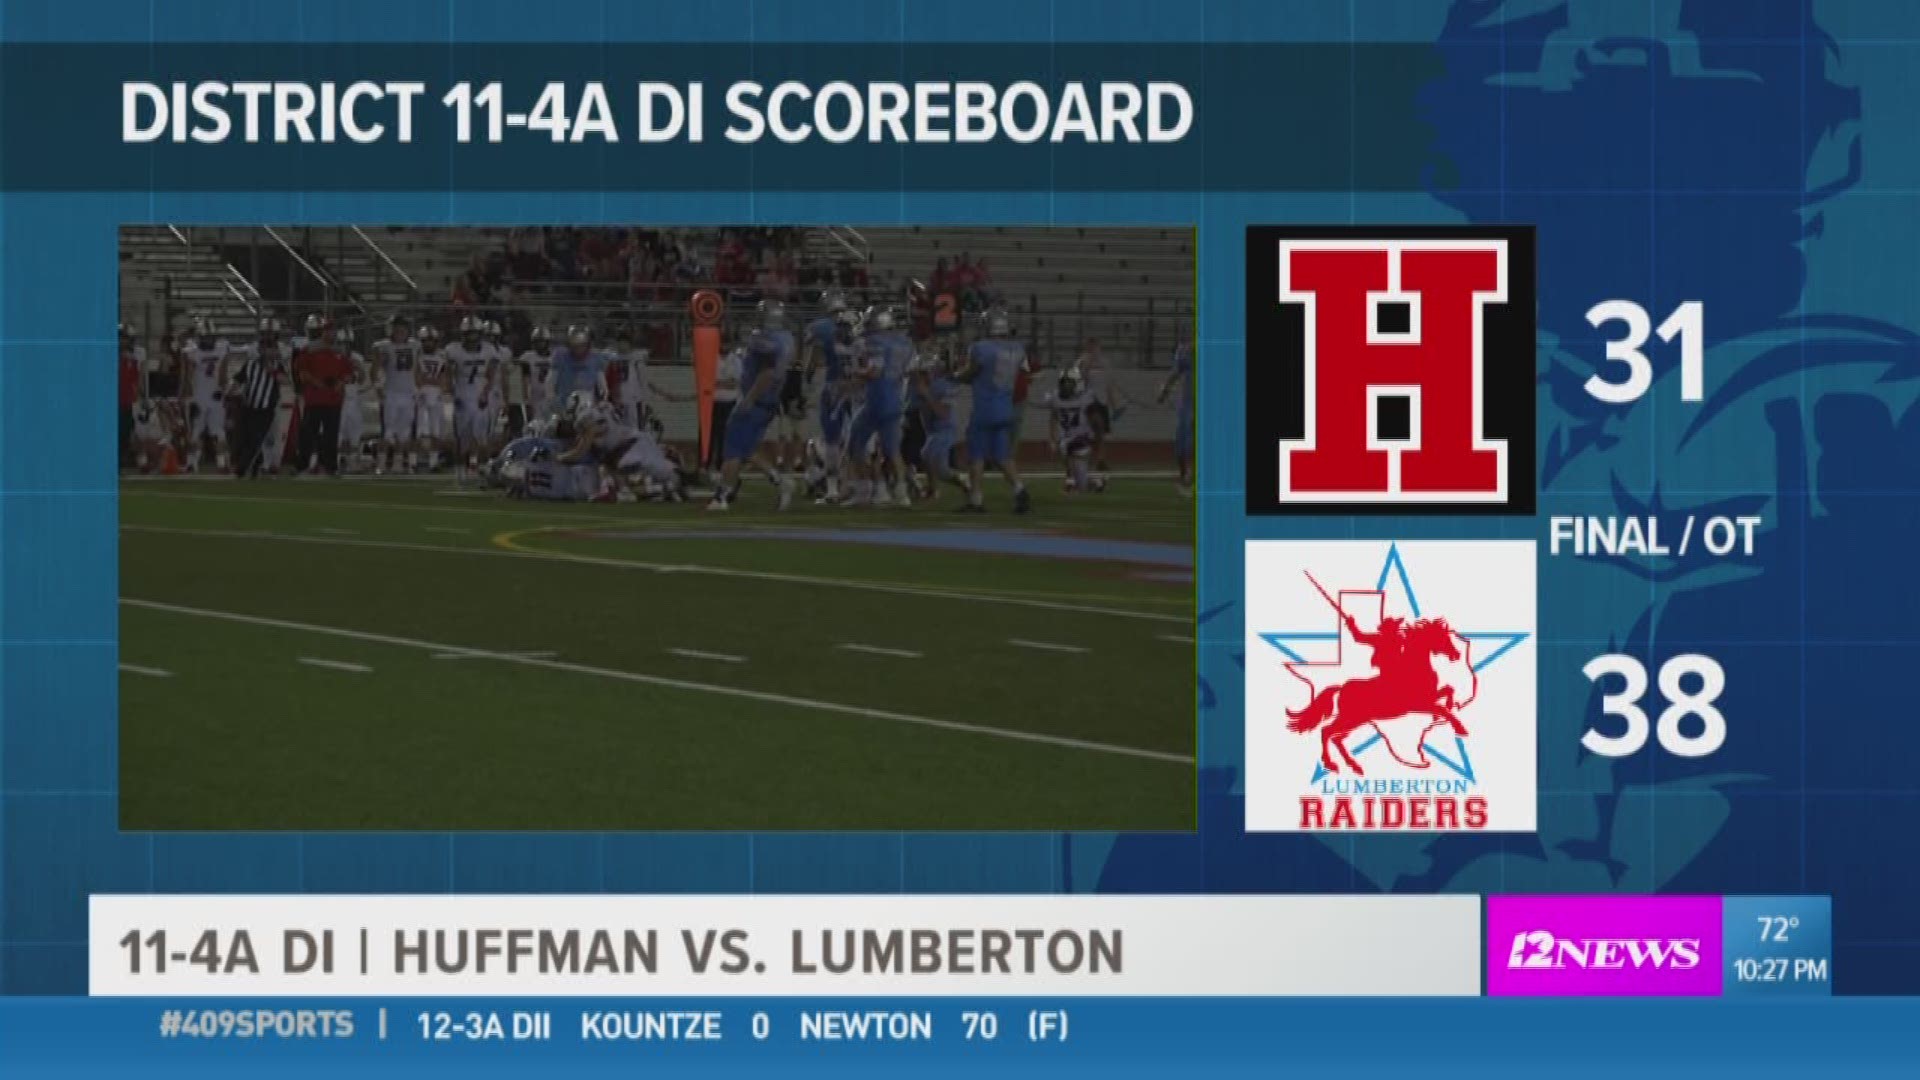 WEEK 7: Lumberton High School takes the win from Huffman 38 - 31 in overtime